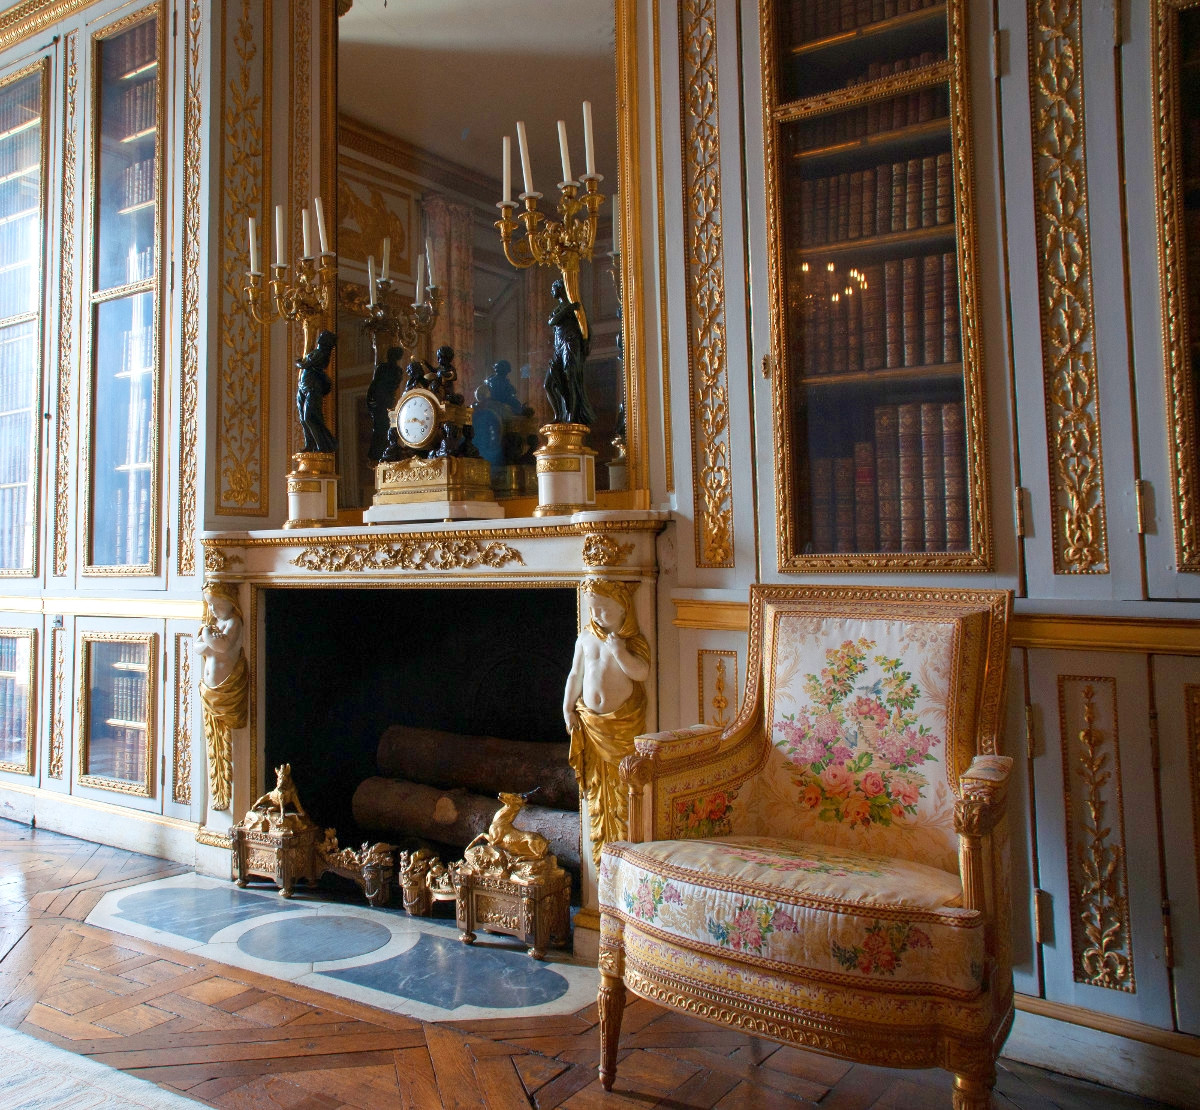 Small apartment of the king - Louis XVI Library. Credit Fanny Schertzer